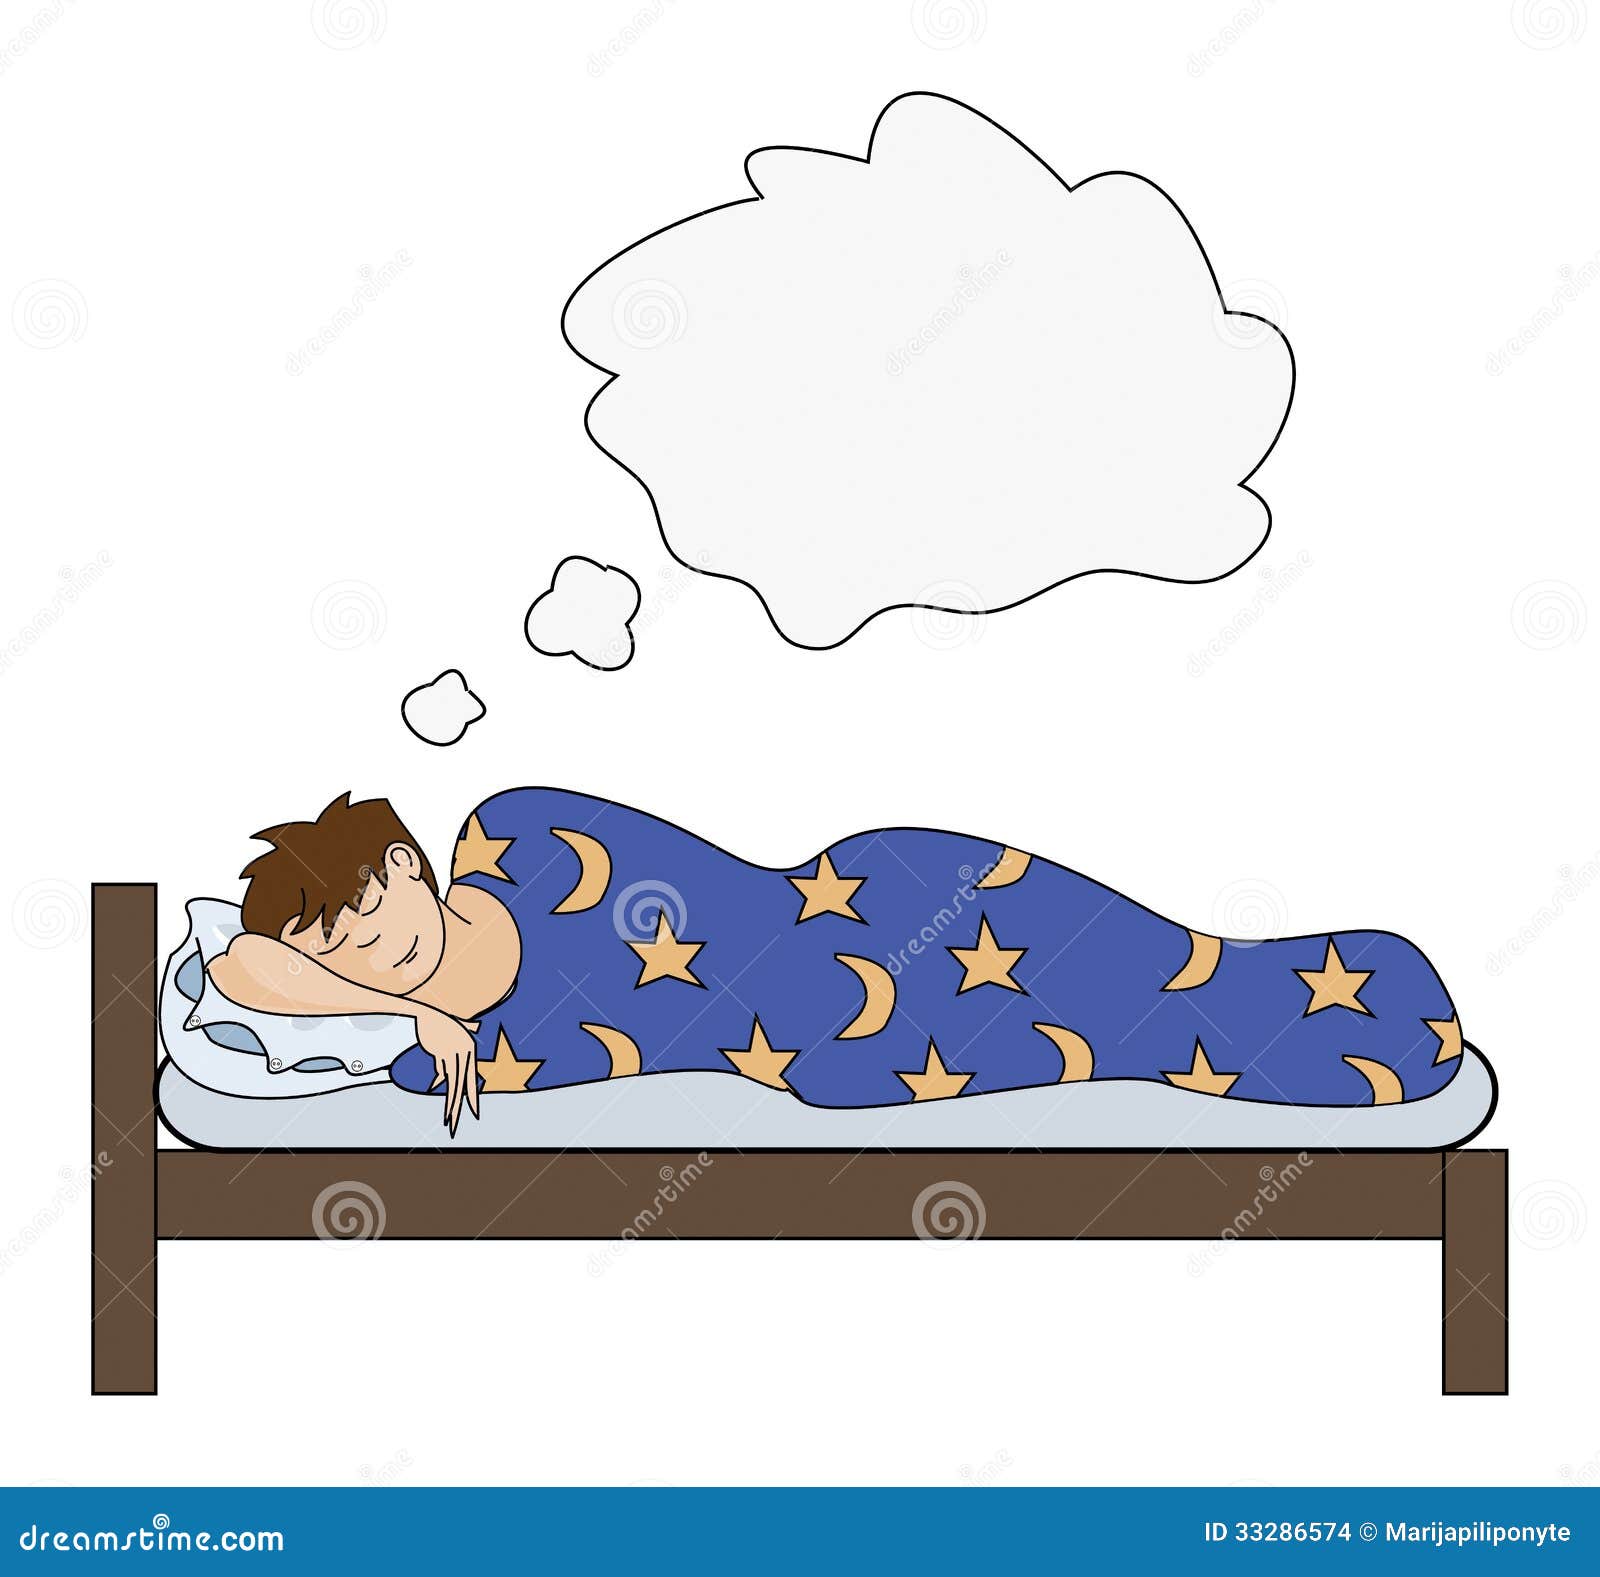 Boy sleeping in bed, with speech bubble, dreaming.